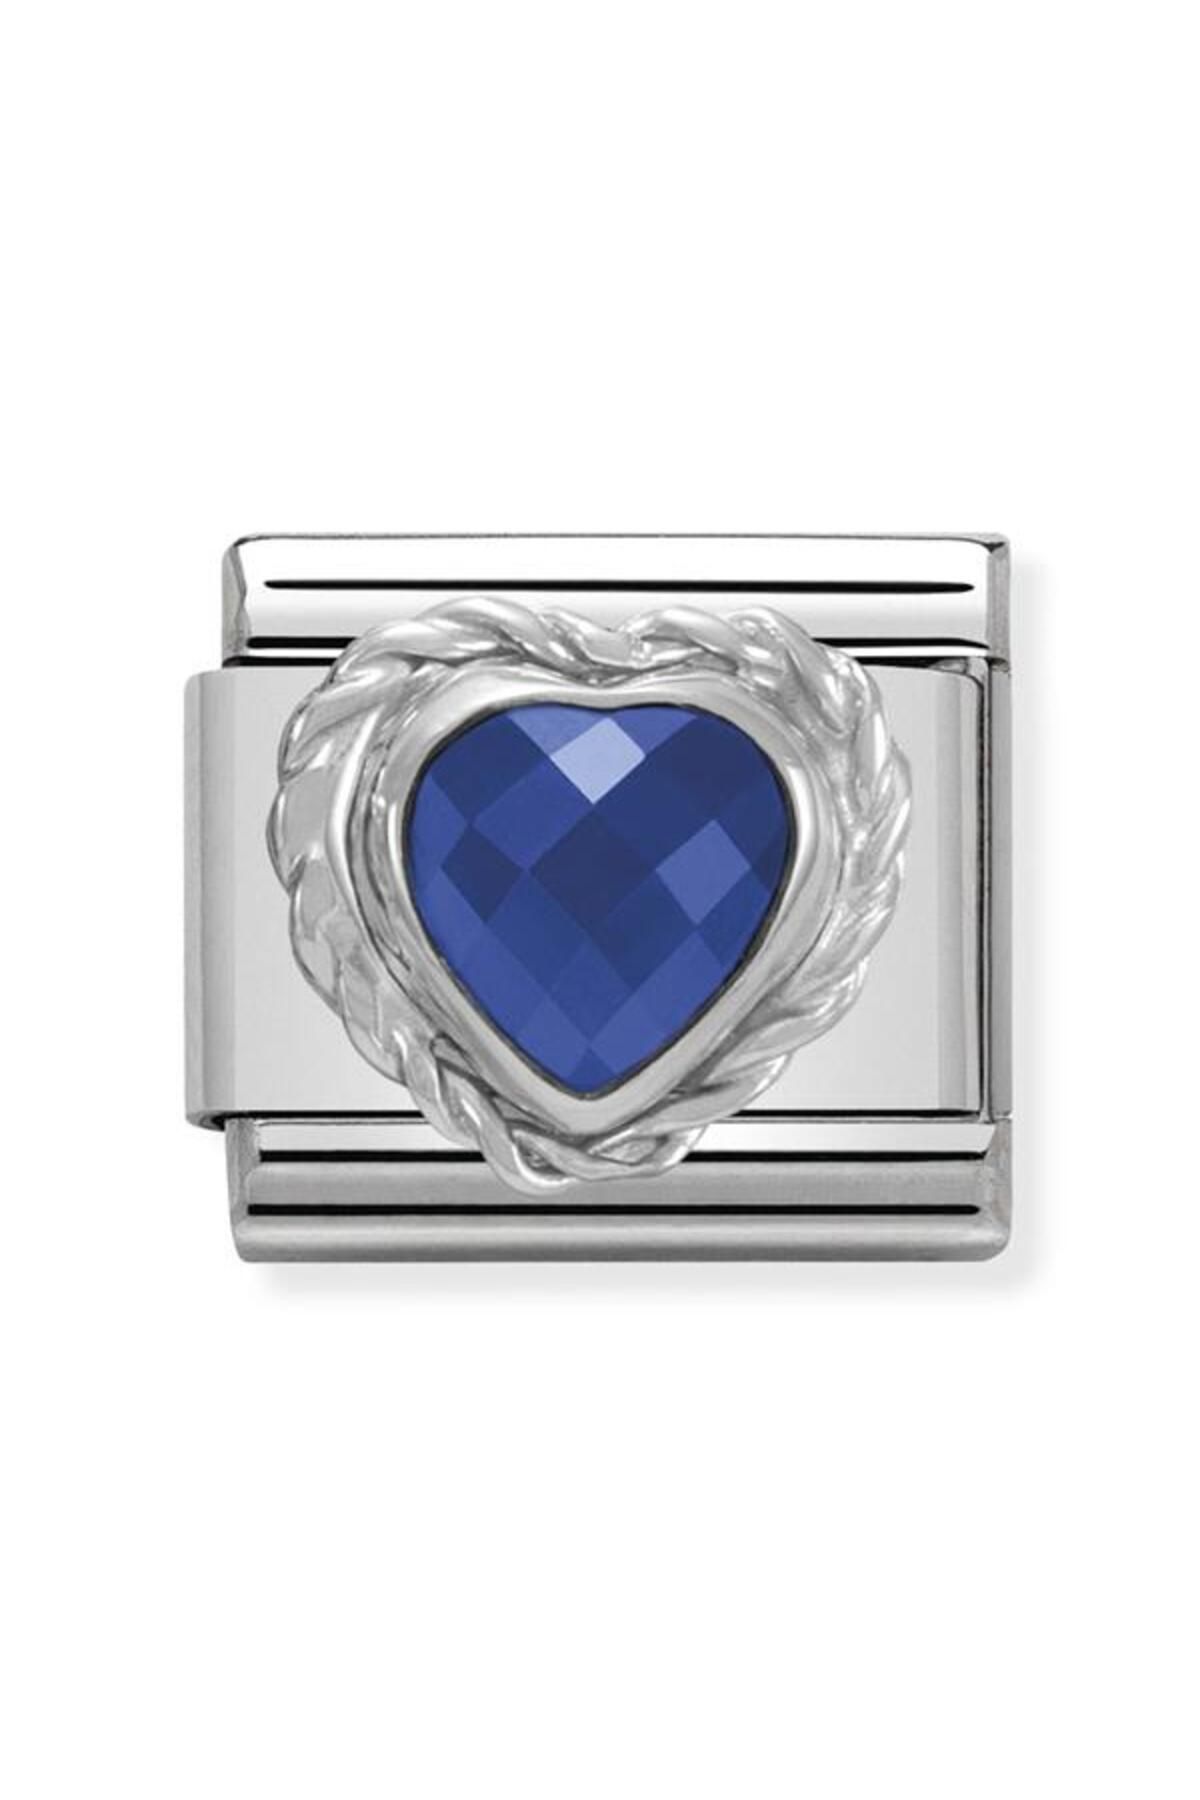 NOMİNATİON Comp, Cl Heart Faceted Cz In Stainless Steel E 925 Silver Twisted Setting (007_blue)